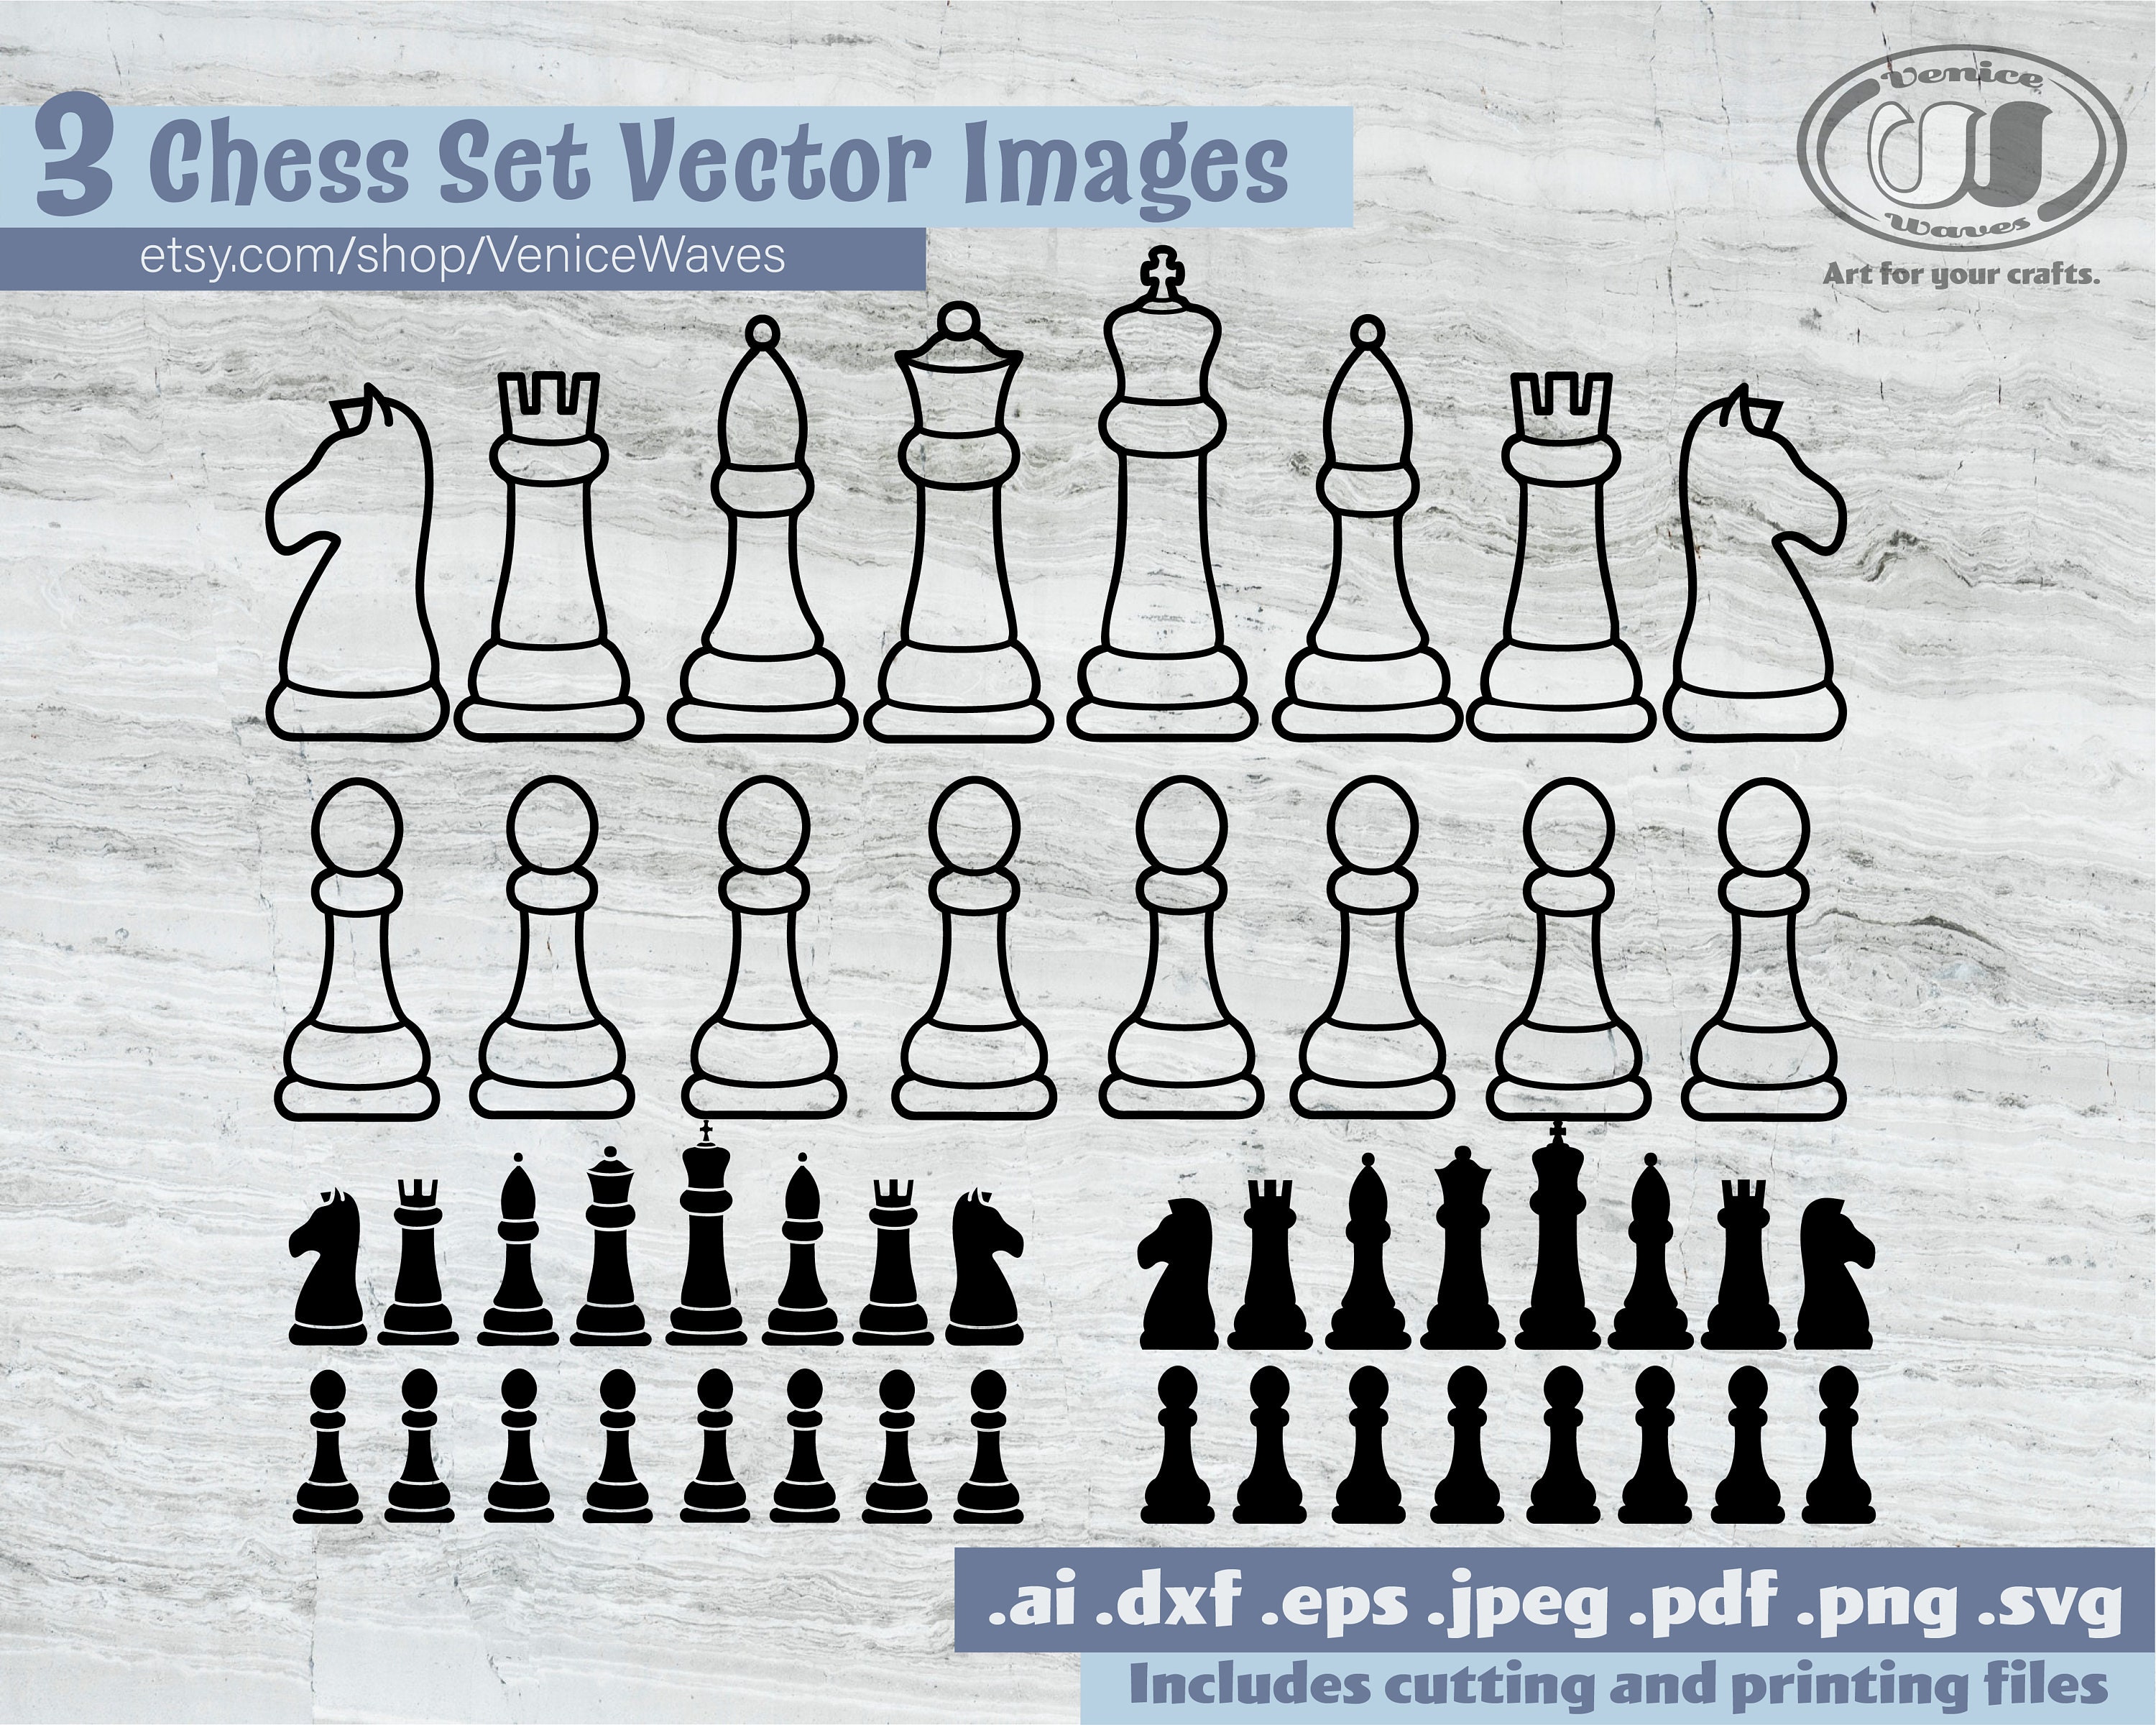 Isometric Vector Image On A Blue Background, Chess Pieces And Their Names,  School Of Chess Royalty Free SVG, Cliparts, Vectors, and Stock  Illustration. Image 123620529.